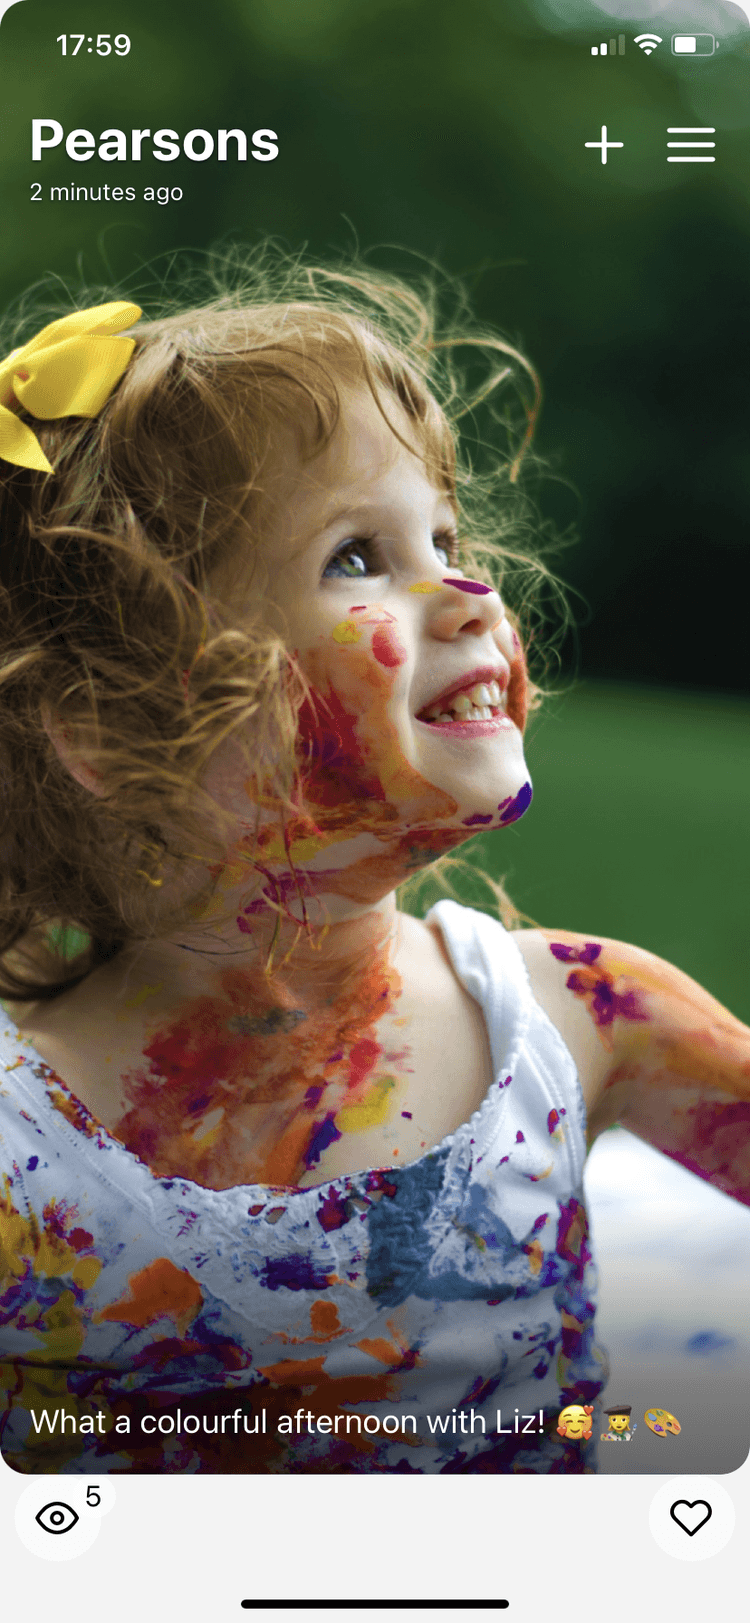 Mobile phone screen showing a photo of a smiling 5 year old girl with colorful paint all over her face.